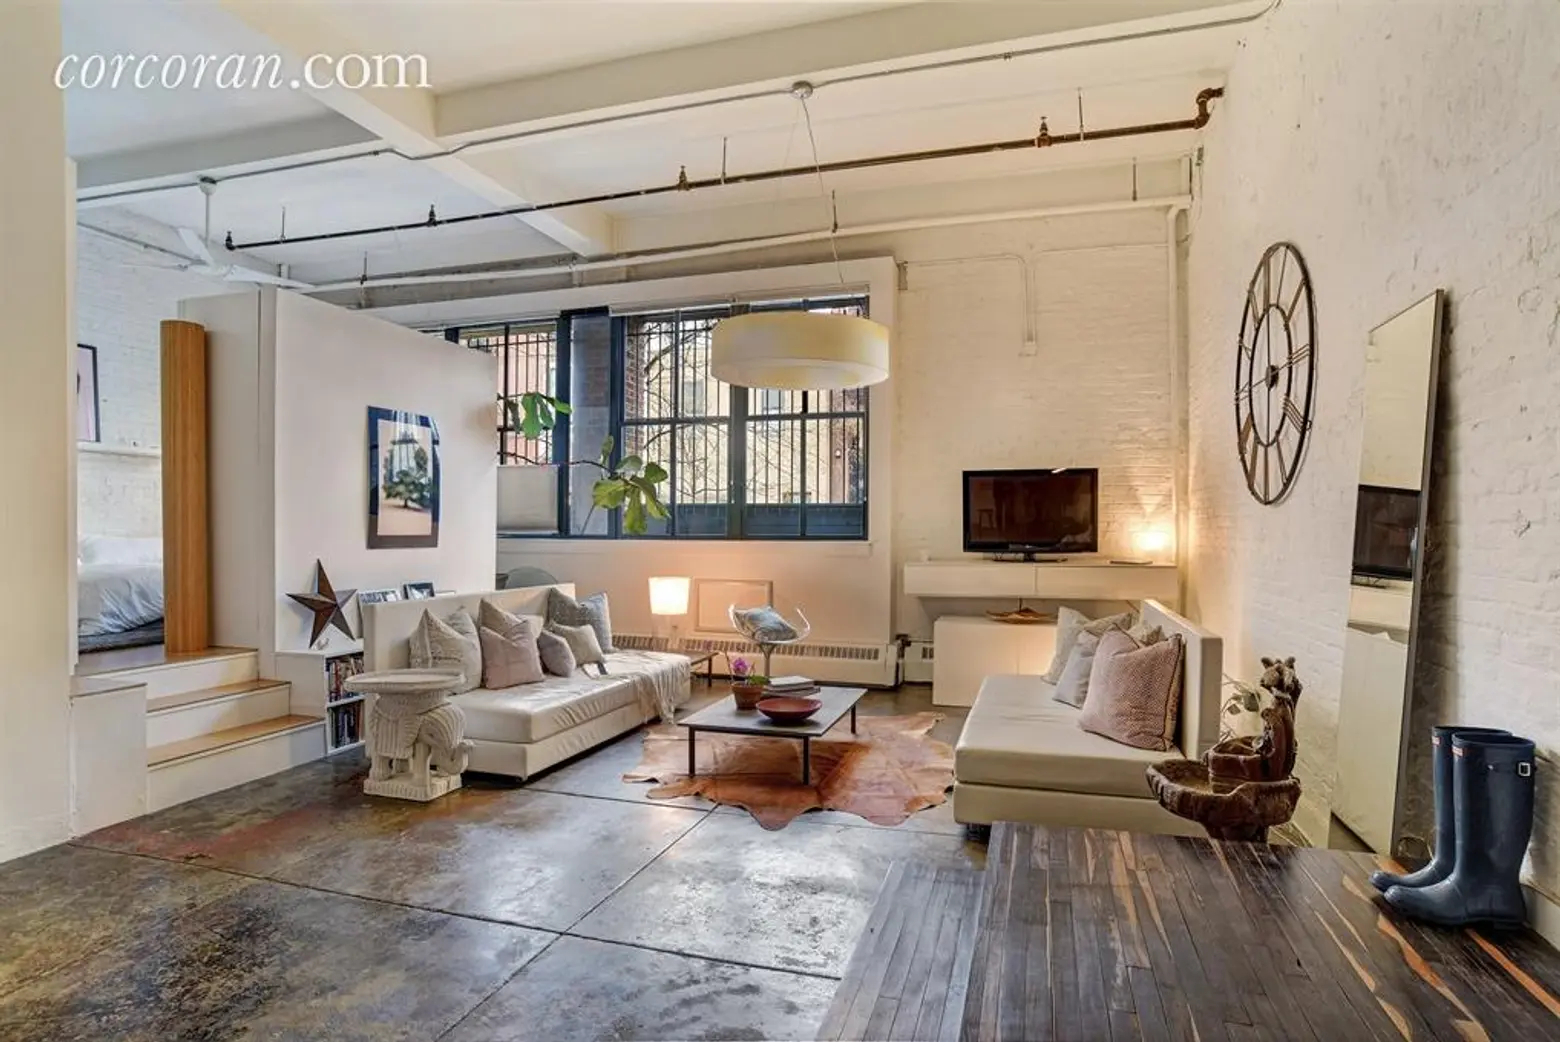 This $1.2M Factory Loft With a Rooftop Garden Is a Pleasant Surprise in Greenwood